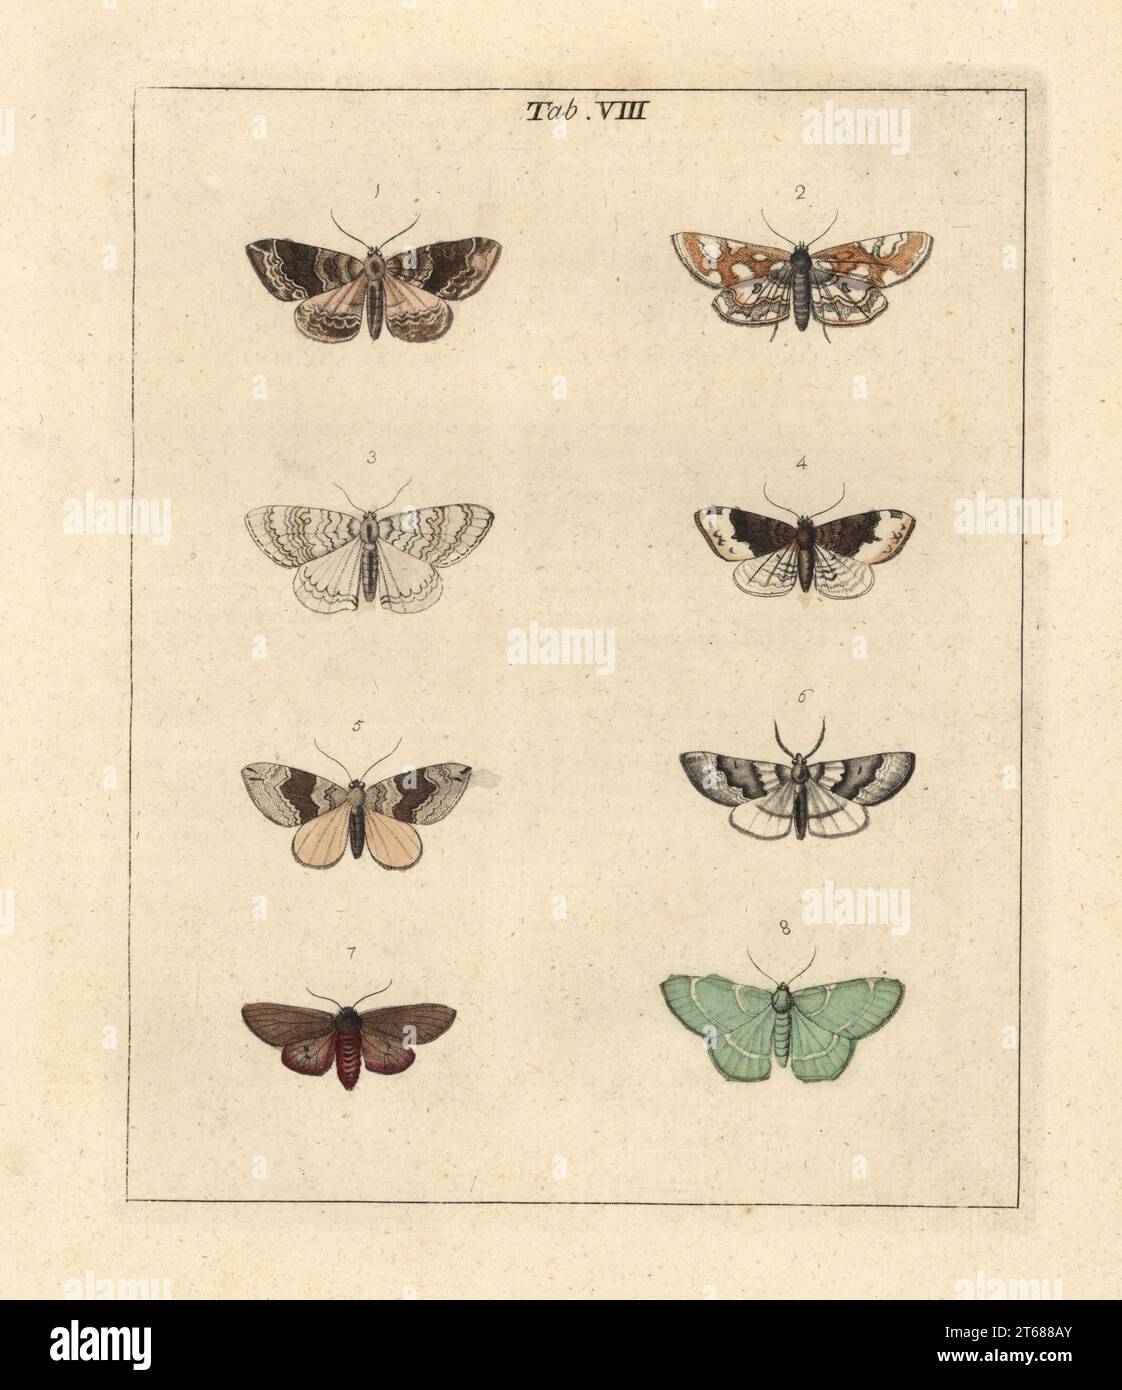 Clouded carpet or phoenix, Eulithis prunata 1, brown China-mark, Elophila nymphaeata 2, grey waved 3, short-cloak carpet, Euphyia biangulata 4, chocolate bar 5, unnamed 6,7, and small emerald, Hemistola chrysoprasaria 8. Handcoloured copperplate engraving drawn and engraved by Moses Harris from his own Exposition of English Insects, Including the several Classes of Neuroptera, Hymenoptera, Diptera, or Bees, Flies and Libellulae, White and Robson, London, 1782. Stock Photo